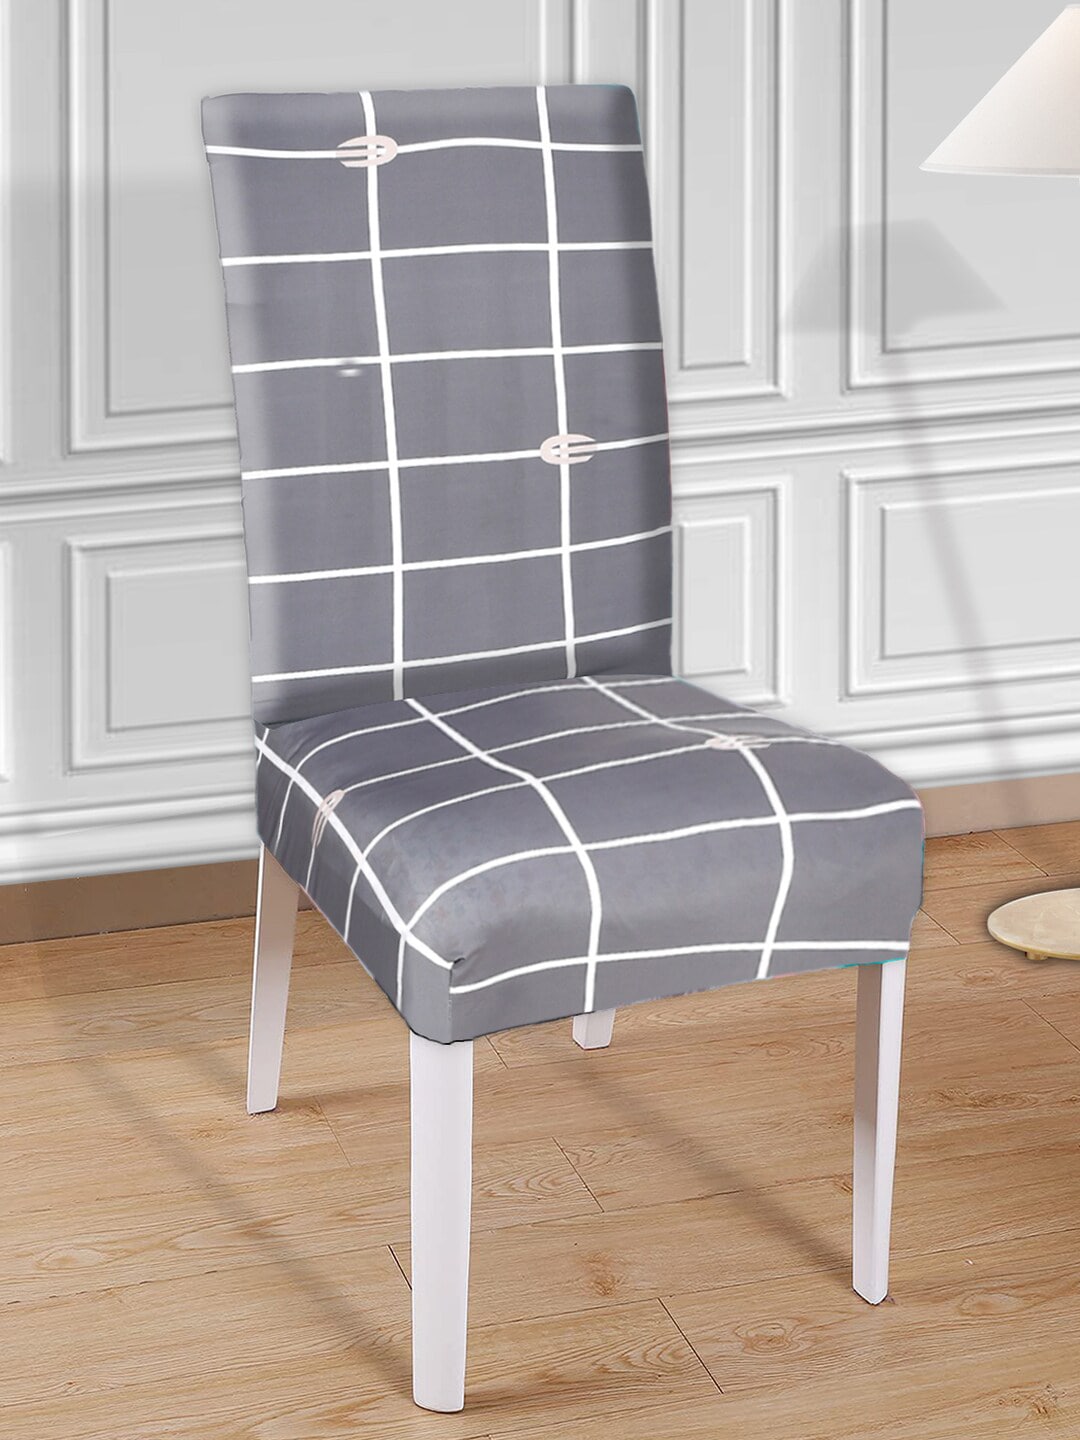 Kuber Industries set of 6 Grey Chair Cover Price in India